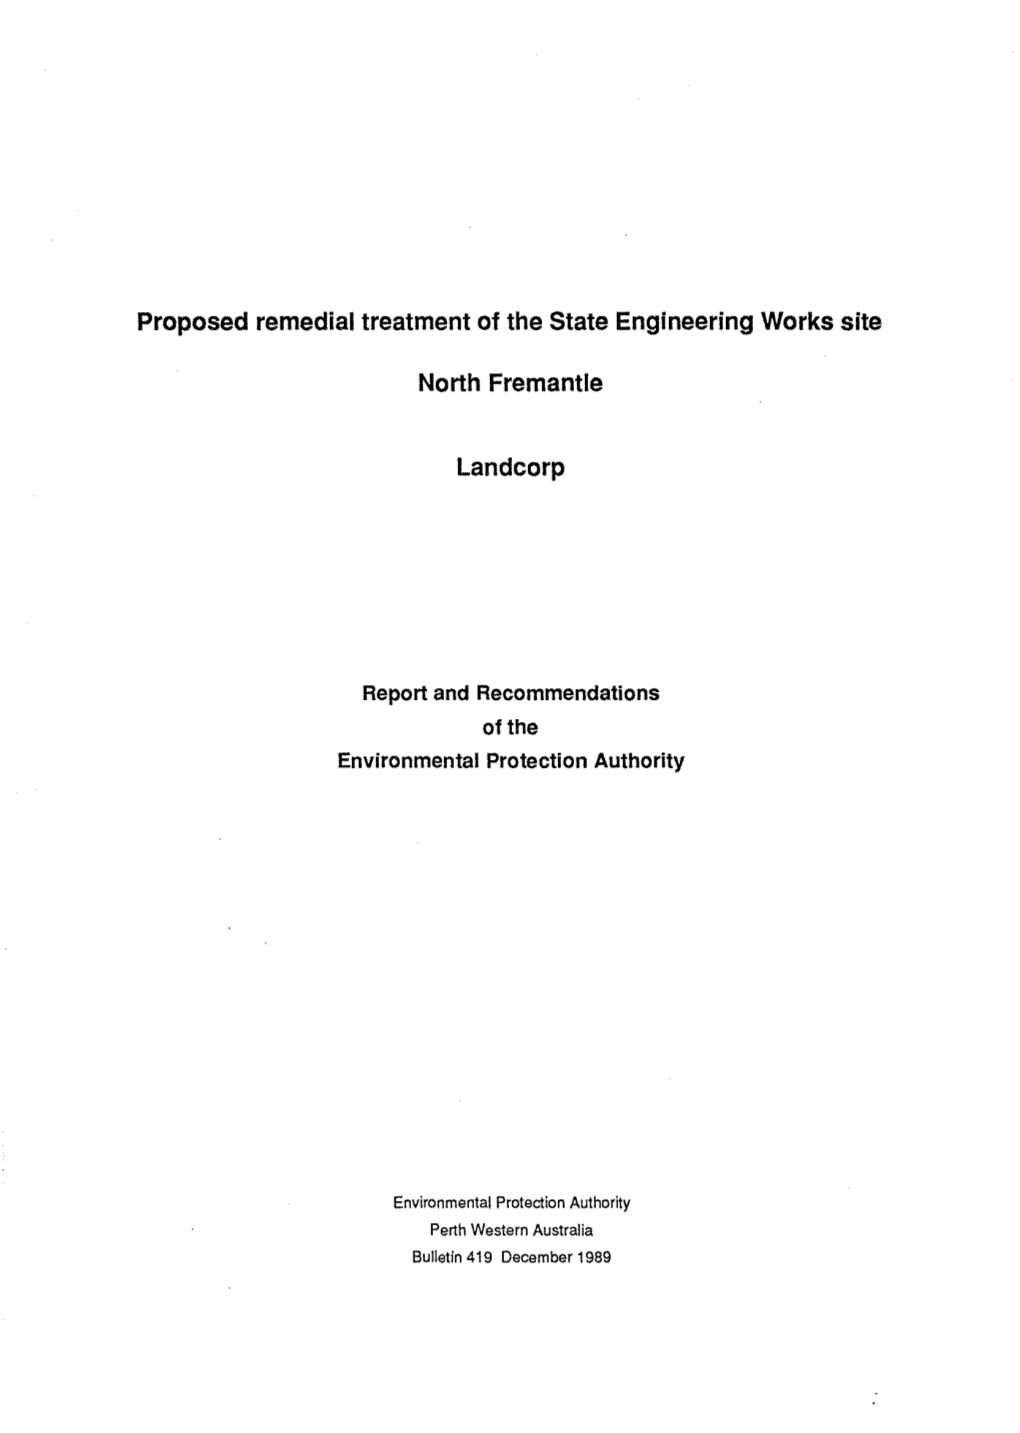 Proposed Remedial Treatment of the State Engineering Works Site North Fremantle Landcorp